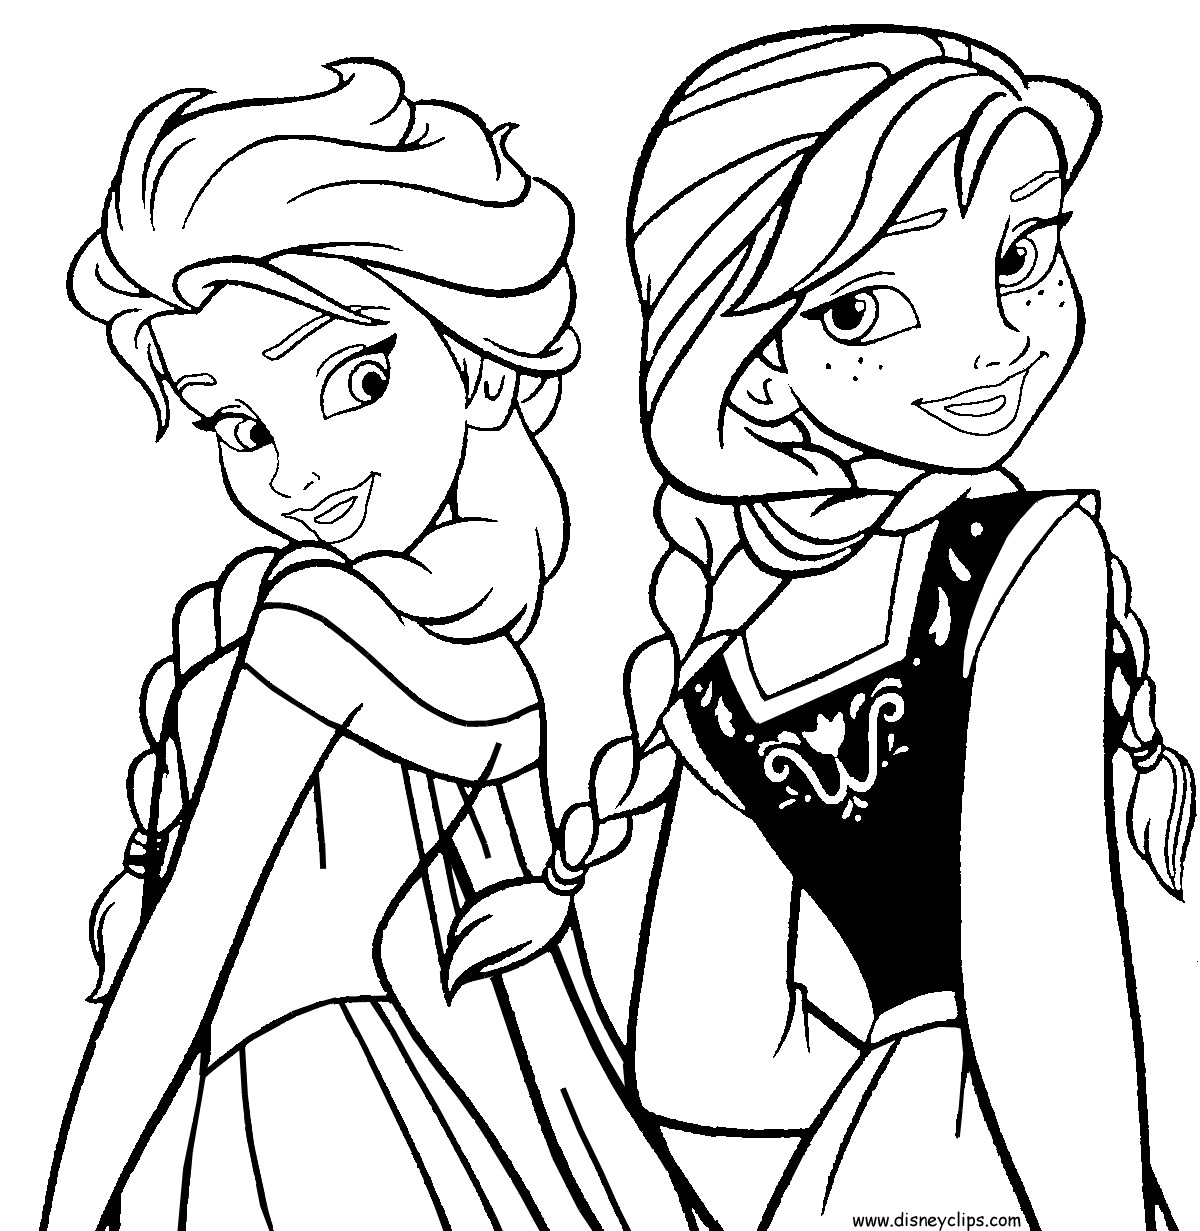 Printable Coloring Pages Frozen
 printable frozen coloring pages